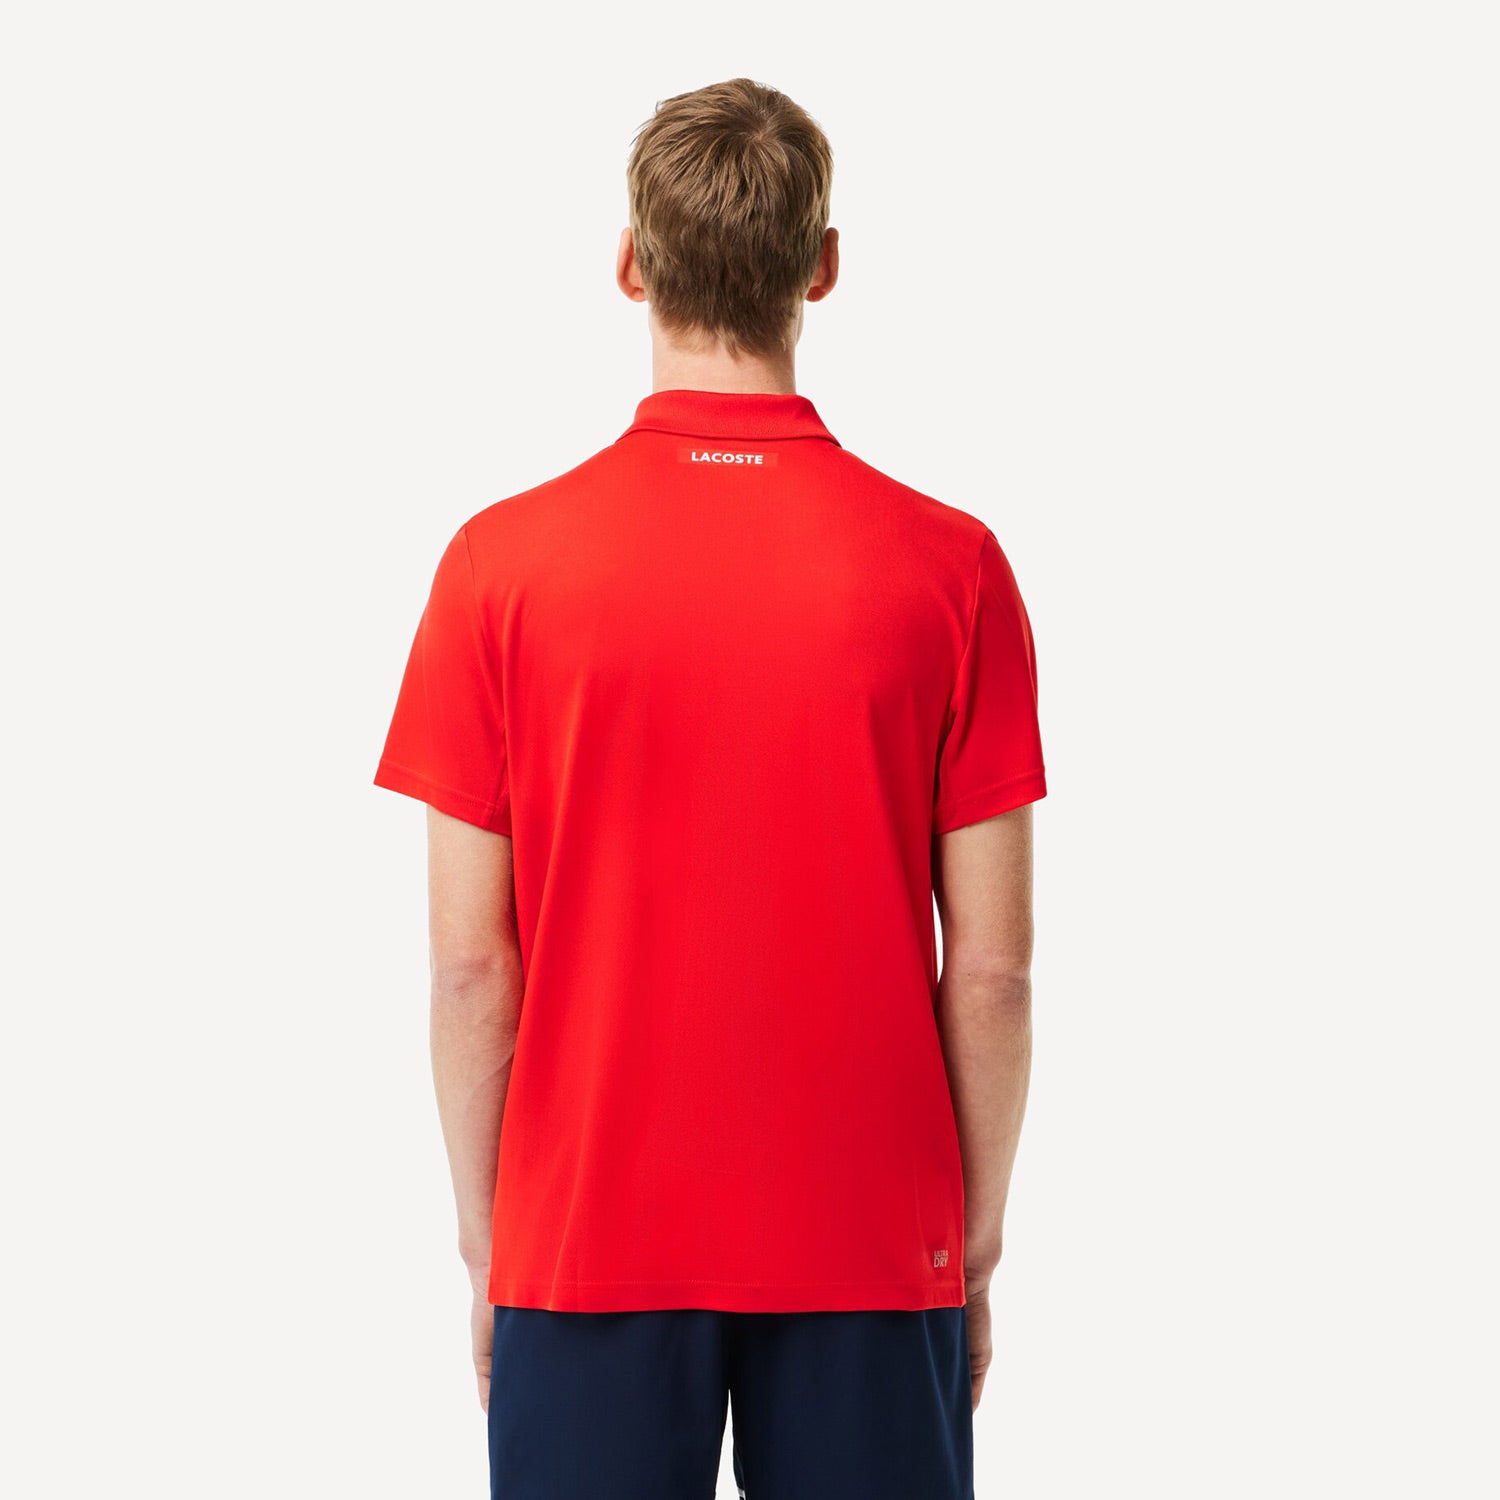 Lacoste Men's Ultra Dry Tennis Polo - Red (2)